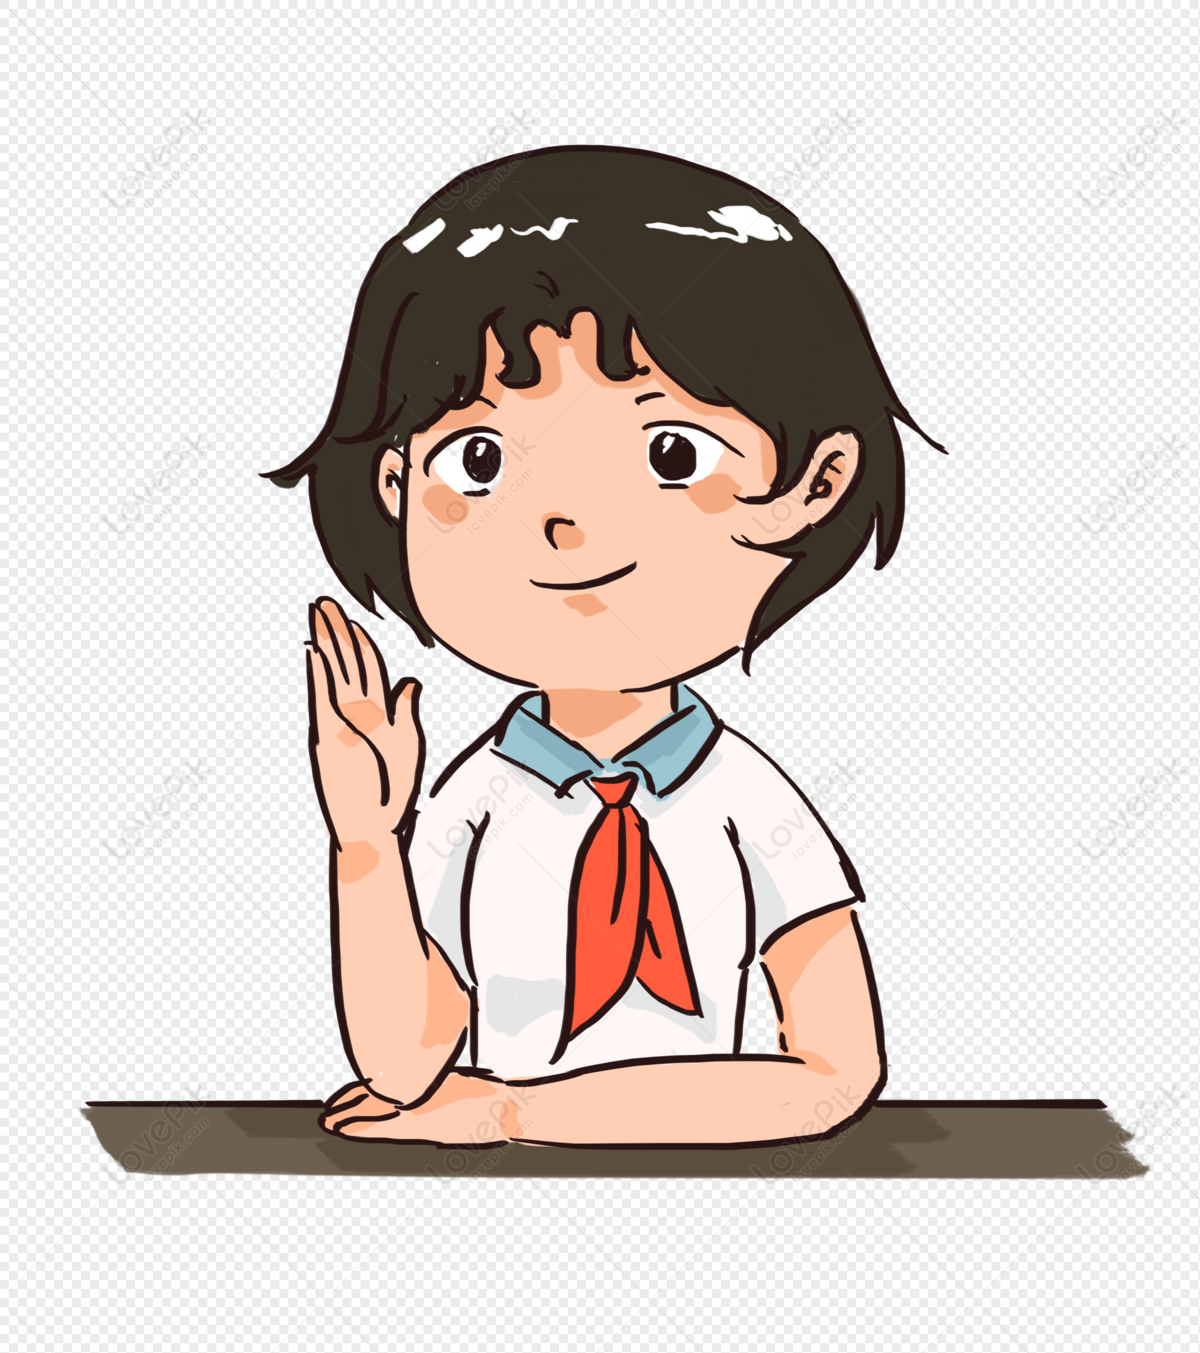 Girl Raising Her Hand To Answer A Question PNG Image Free Download And  Clipart Image For Free Download - Lovepik | 401457171